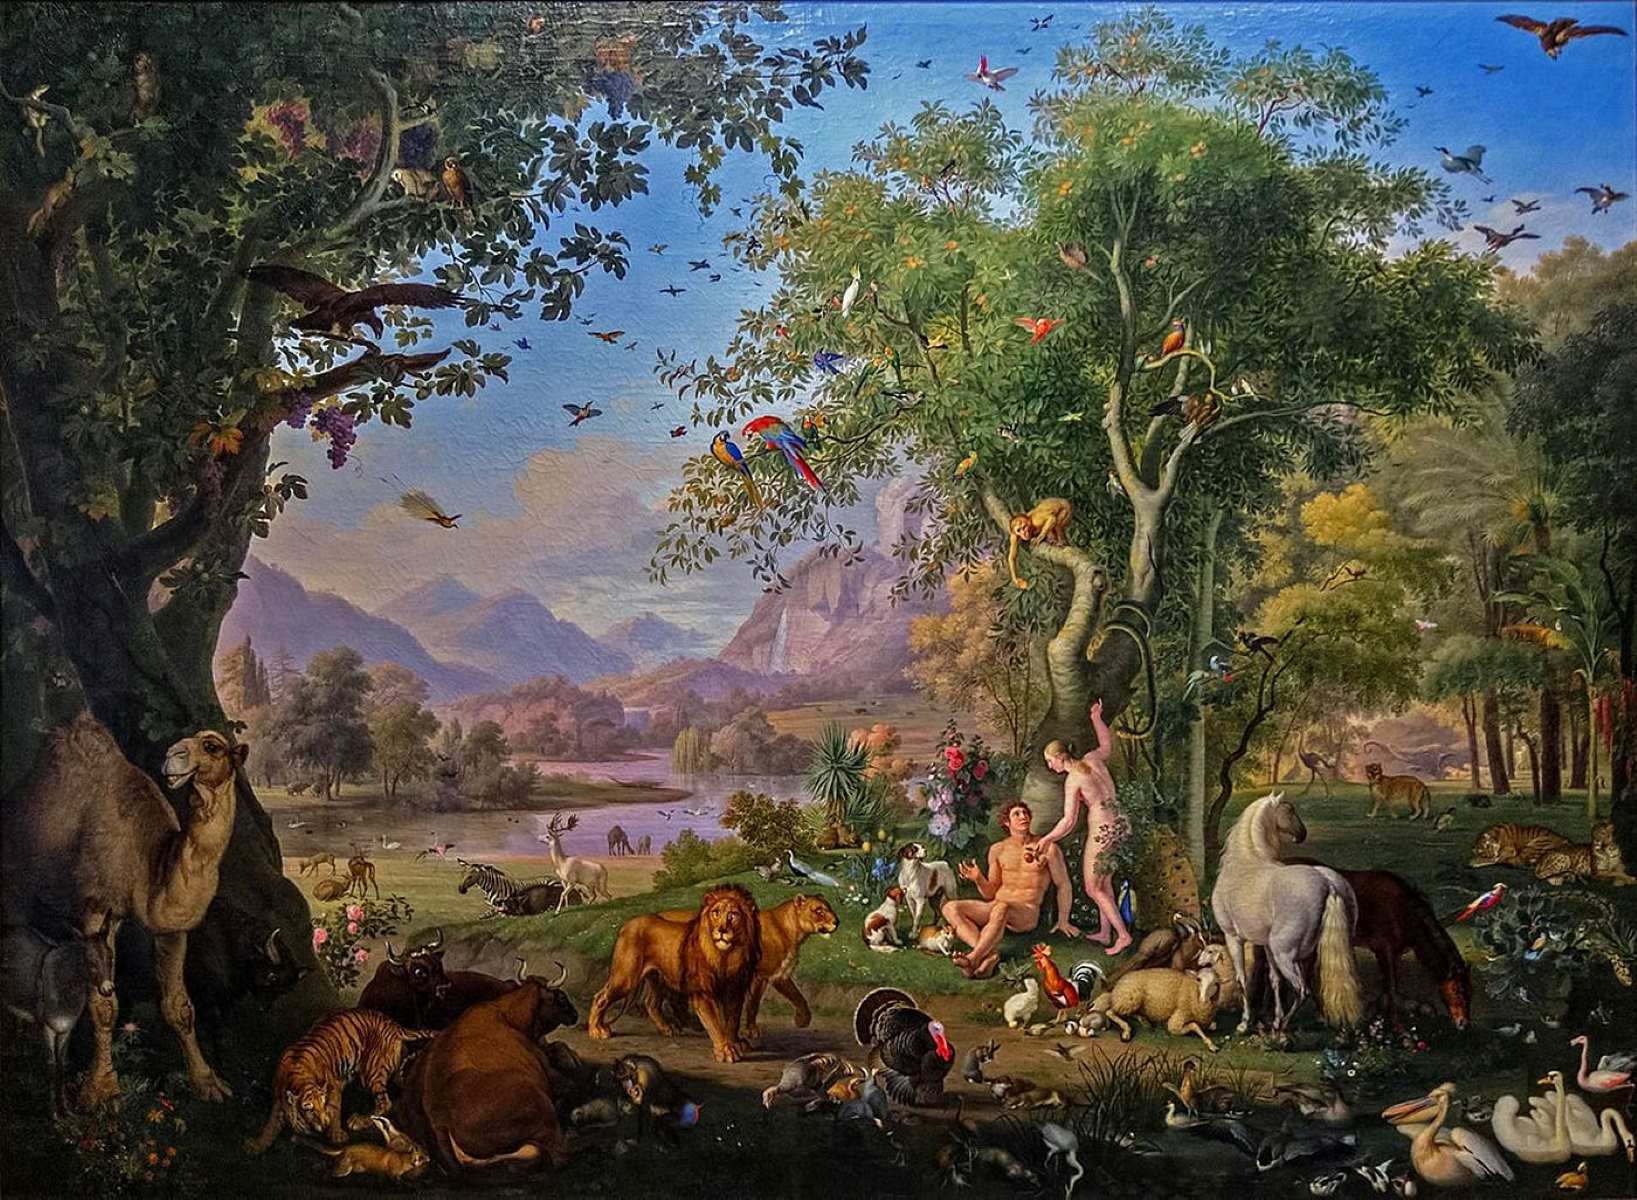 The Mysterious Fate Of The Garden Of Eden: What Really Happened After Adam And Eve's Departure